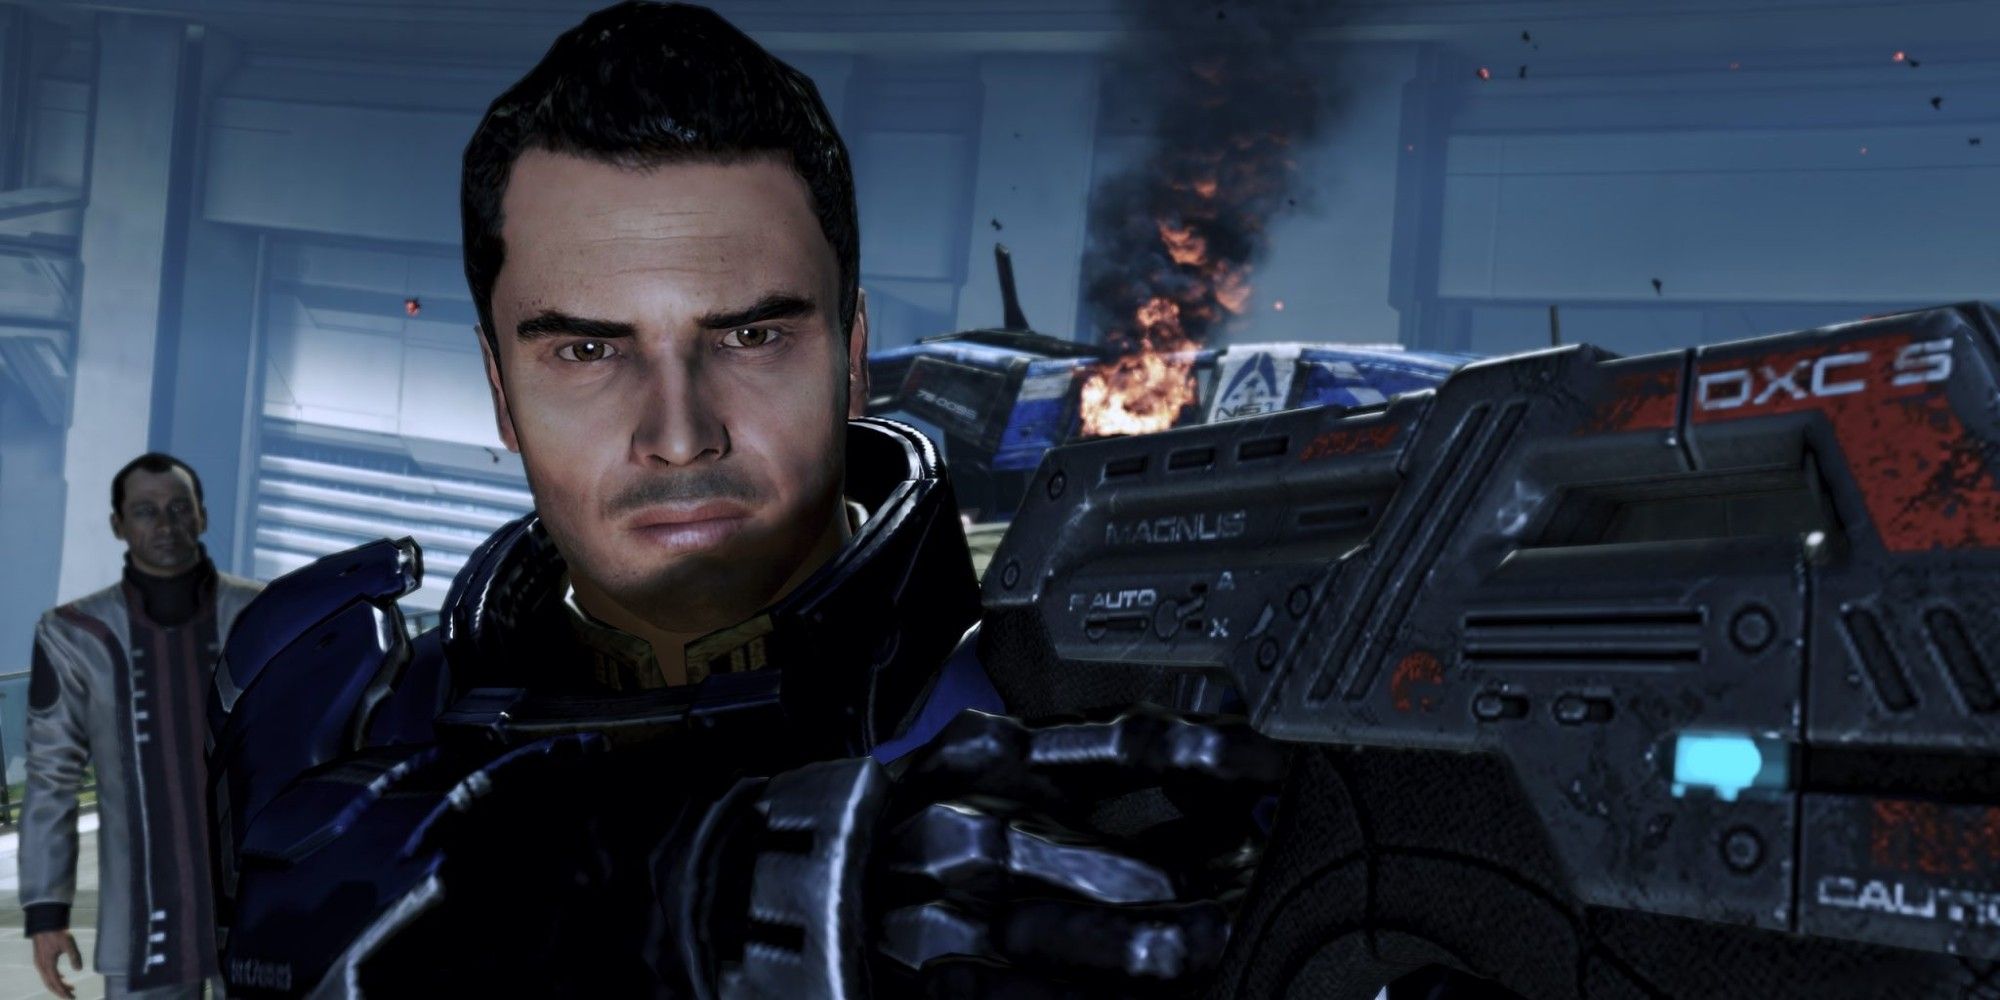 Kaidan protects Councilor Udina on the Citadel in Mass Effect 3